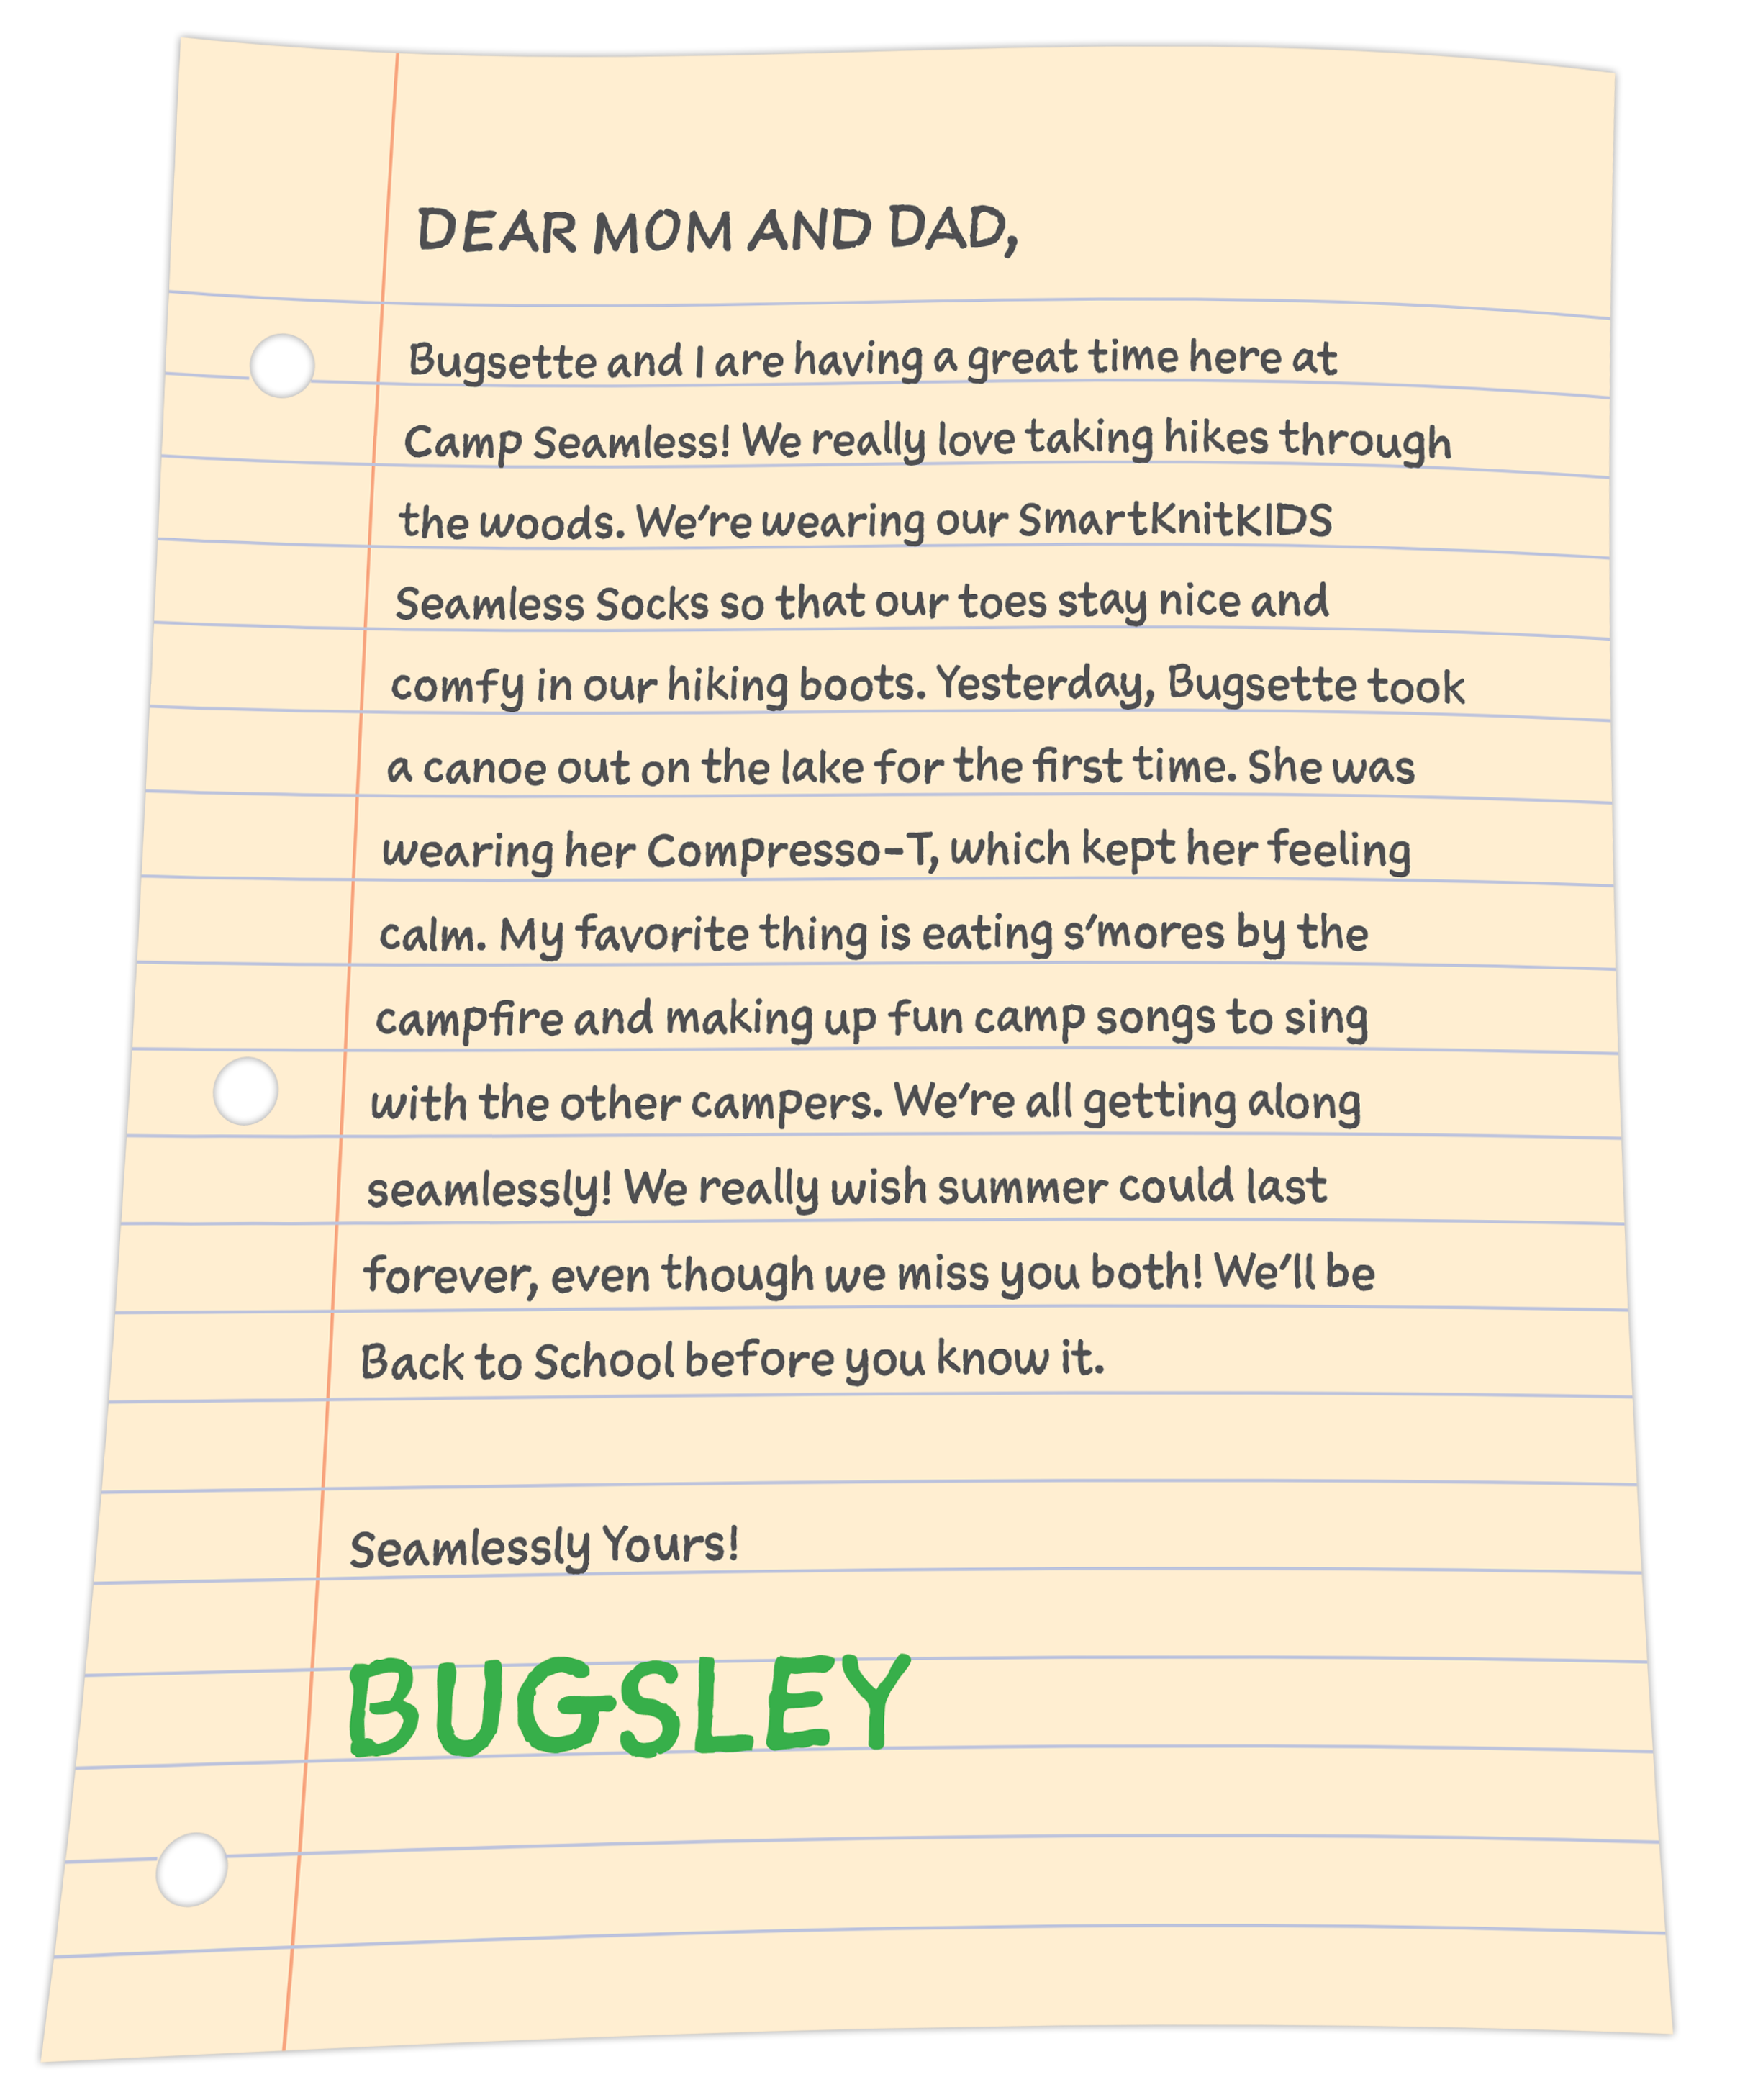 Letter from Bugsley to his parents describing how seamless products have helped him at Camp Seamless.